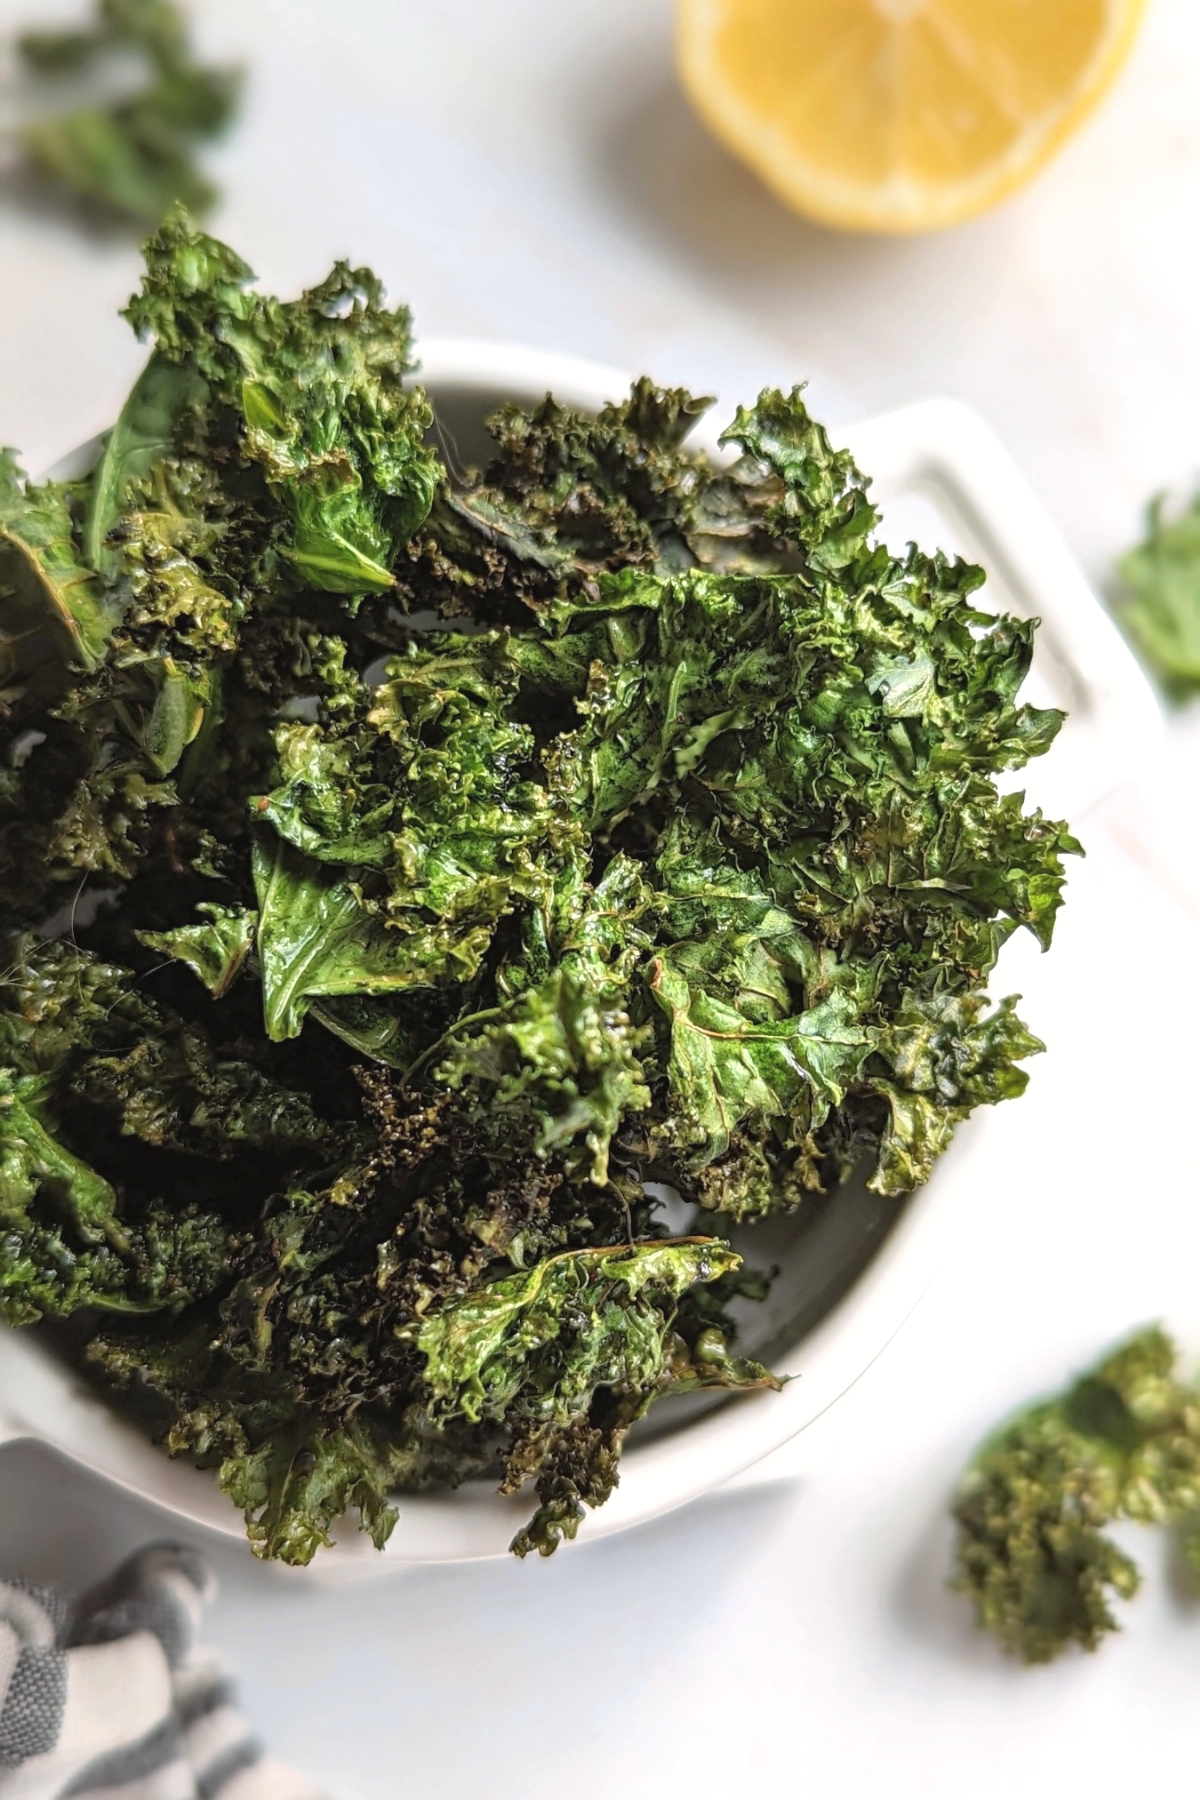 air fry kale chips recipe healthy snacks with kale easy air fryer snack recipes with vegetables spices and oil kale recipes for kids.